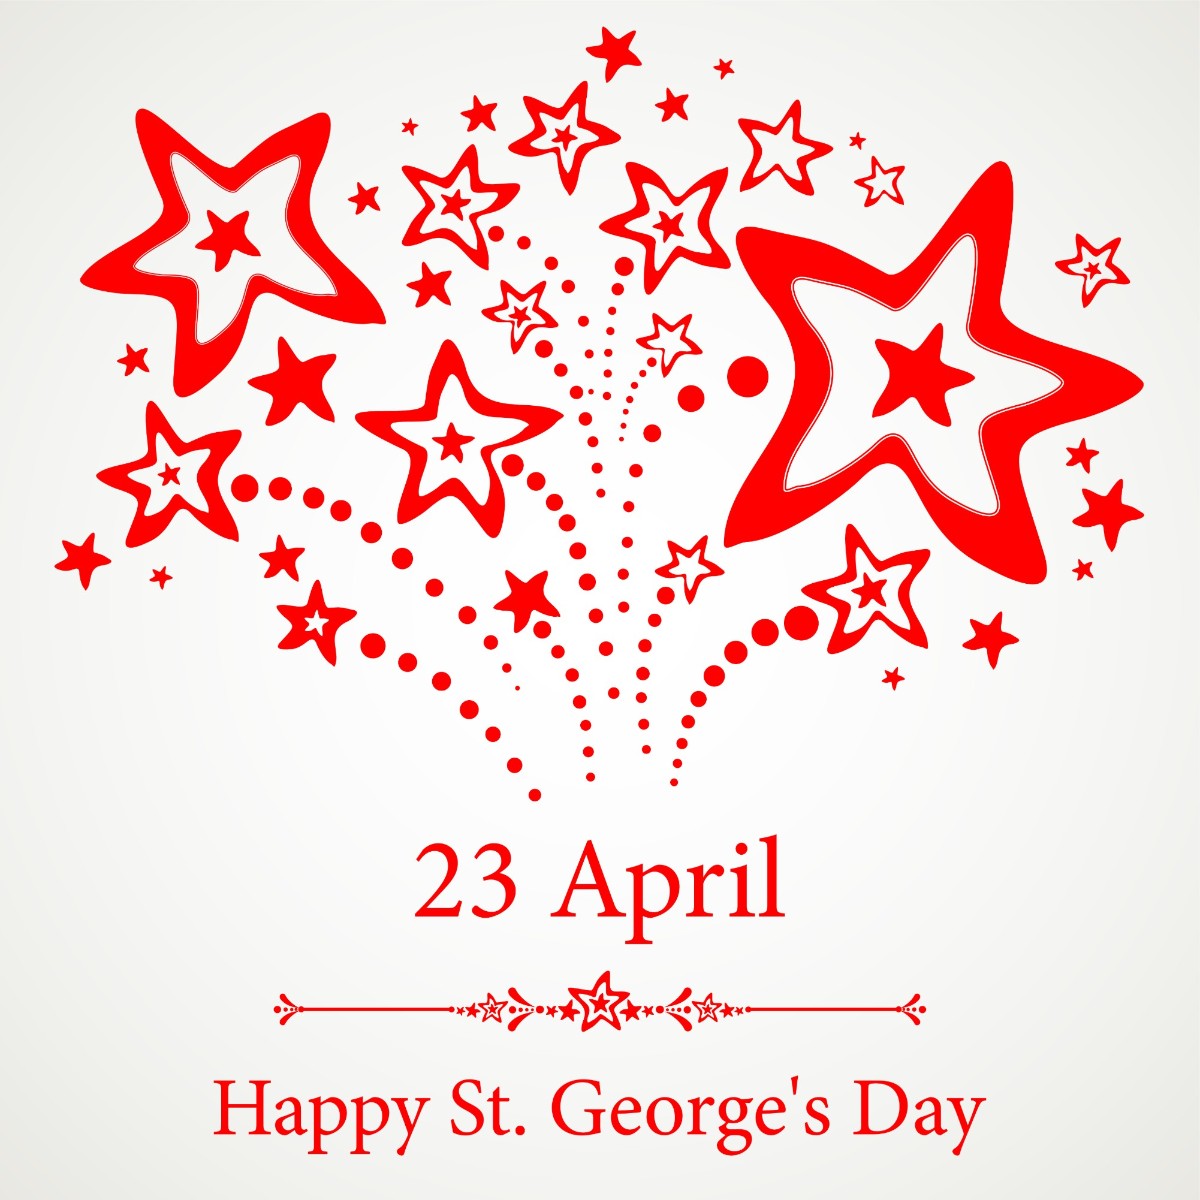 We would like to wish a very Happy St. George’s Day to all our #AbdnFamily and friends who are celebrating today.